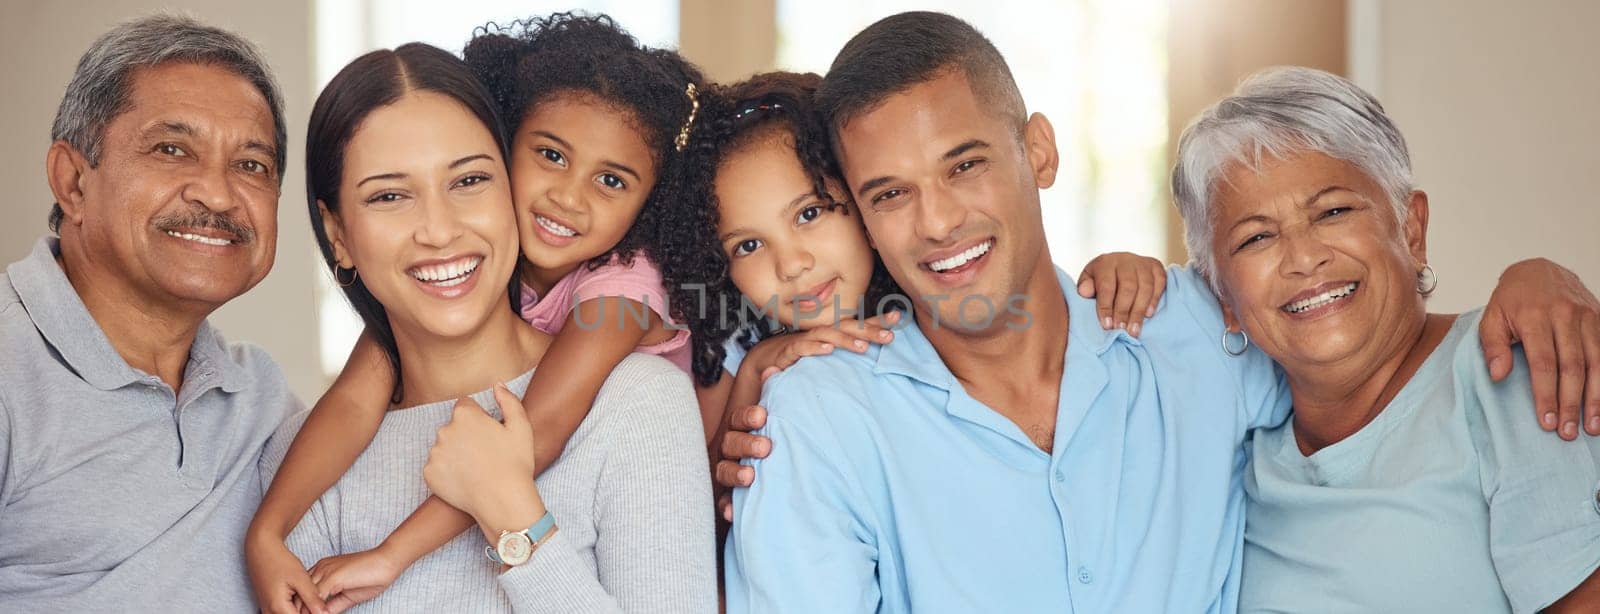 Happy big family, portrait smile and face of men, women with children in happiness at home. Mother, father and kids with grandparents smiling and relaxing together for fun, break or holiday indoors by YuriArcurs